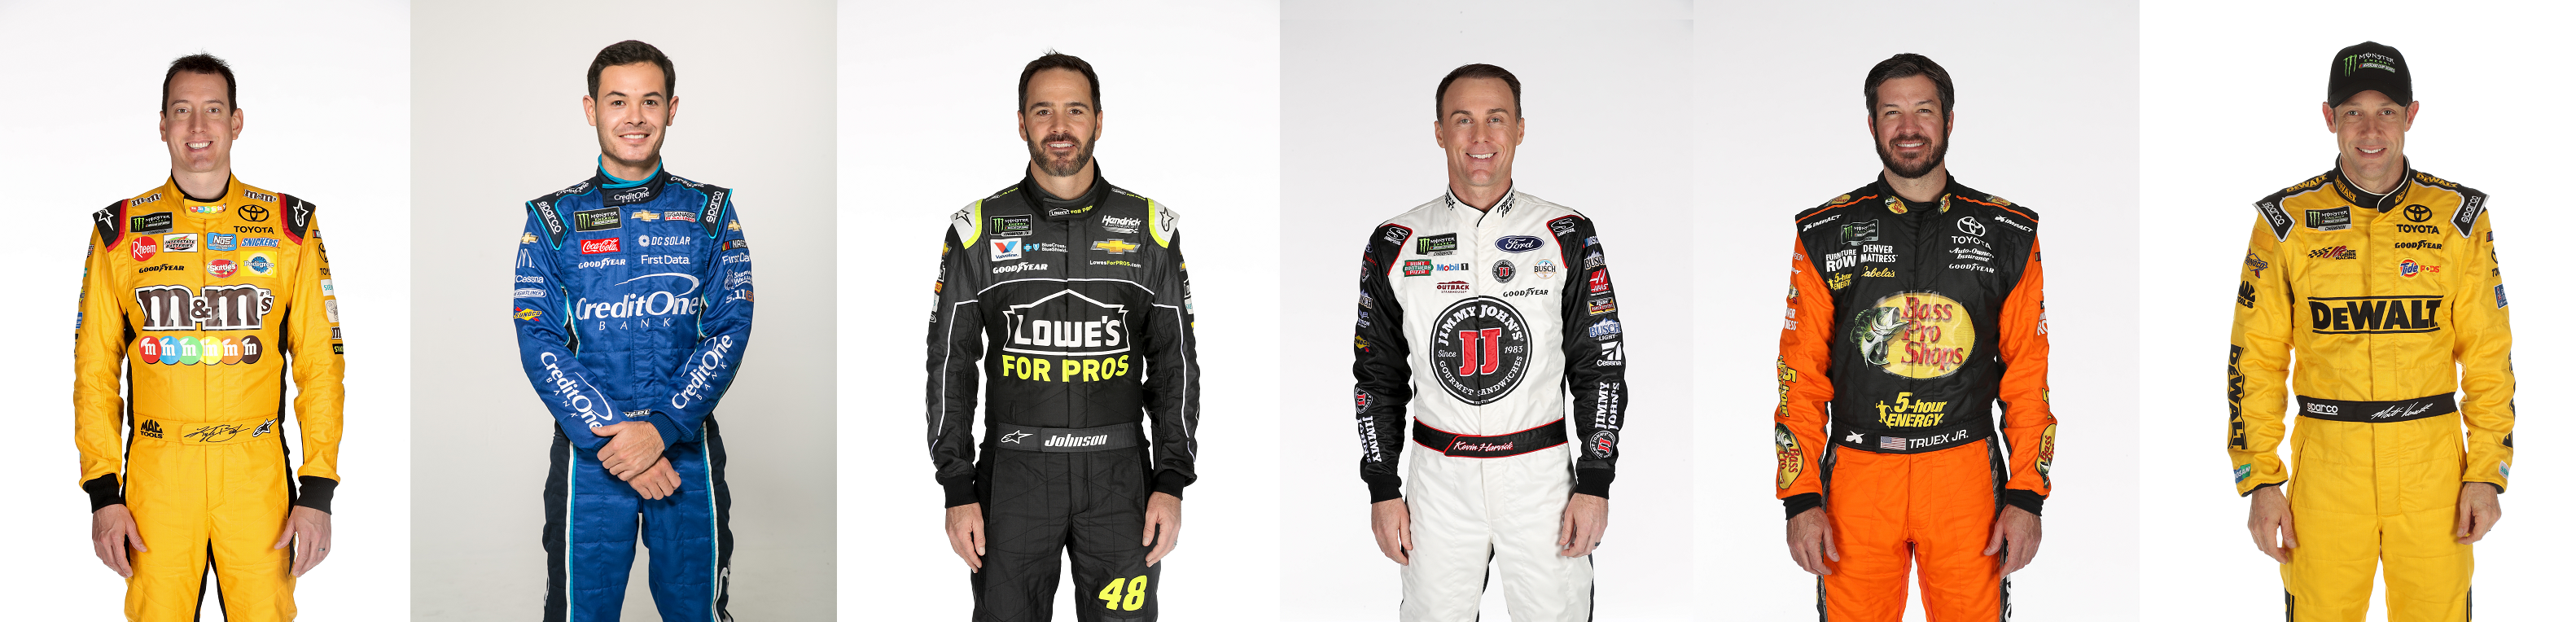 Will one of these six claim the checkered flag tonight?